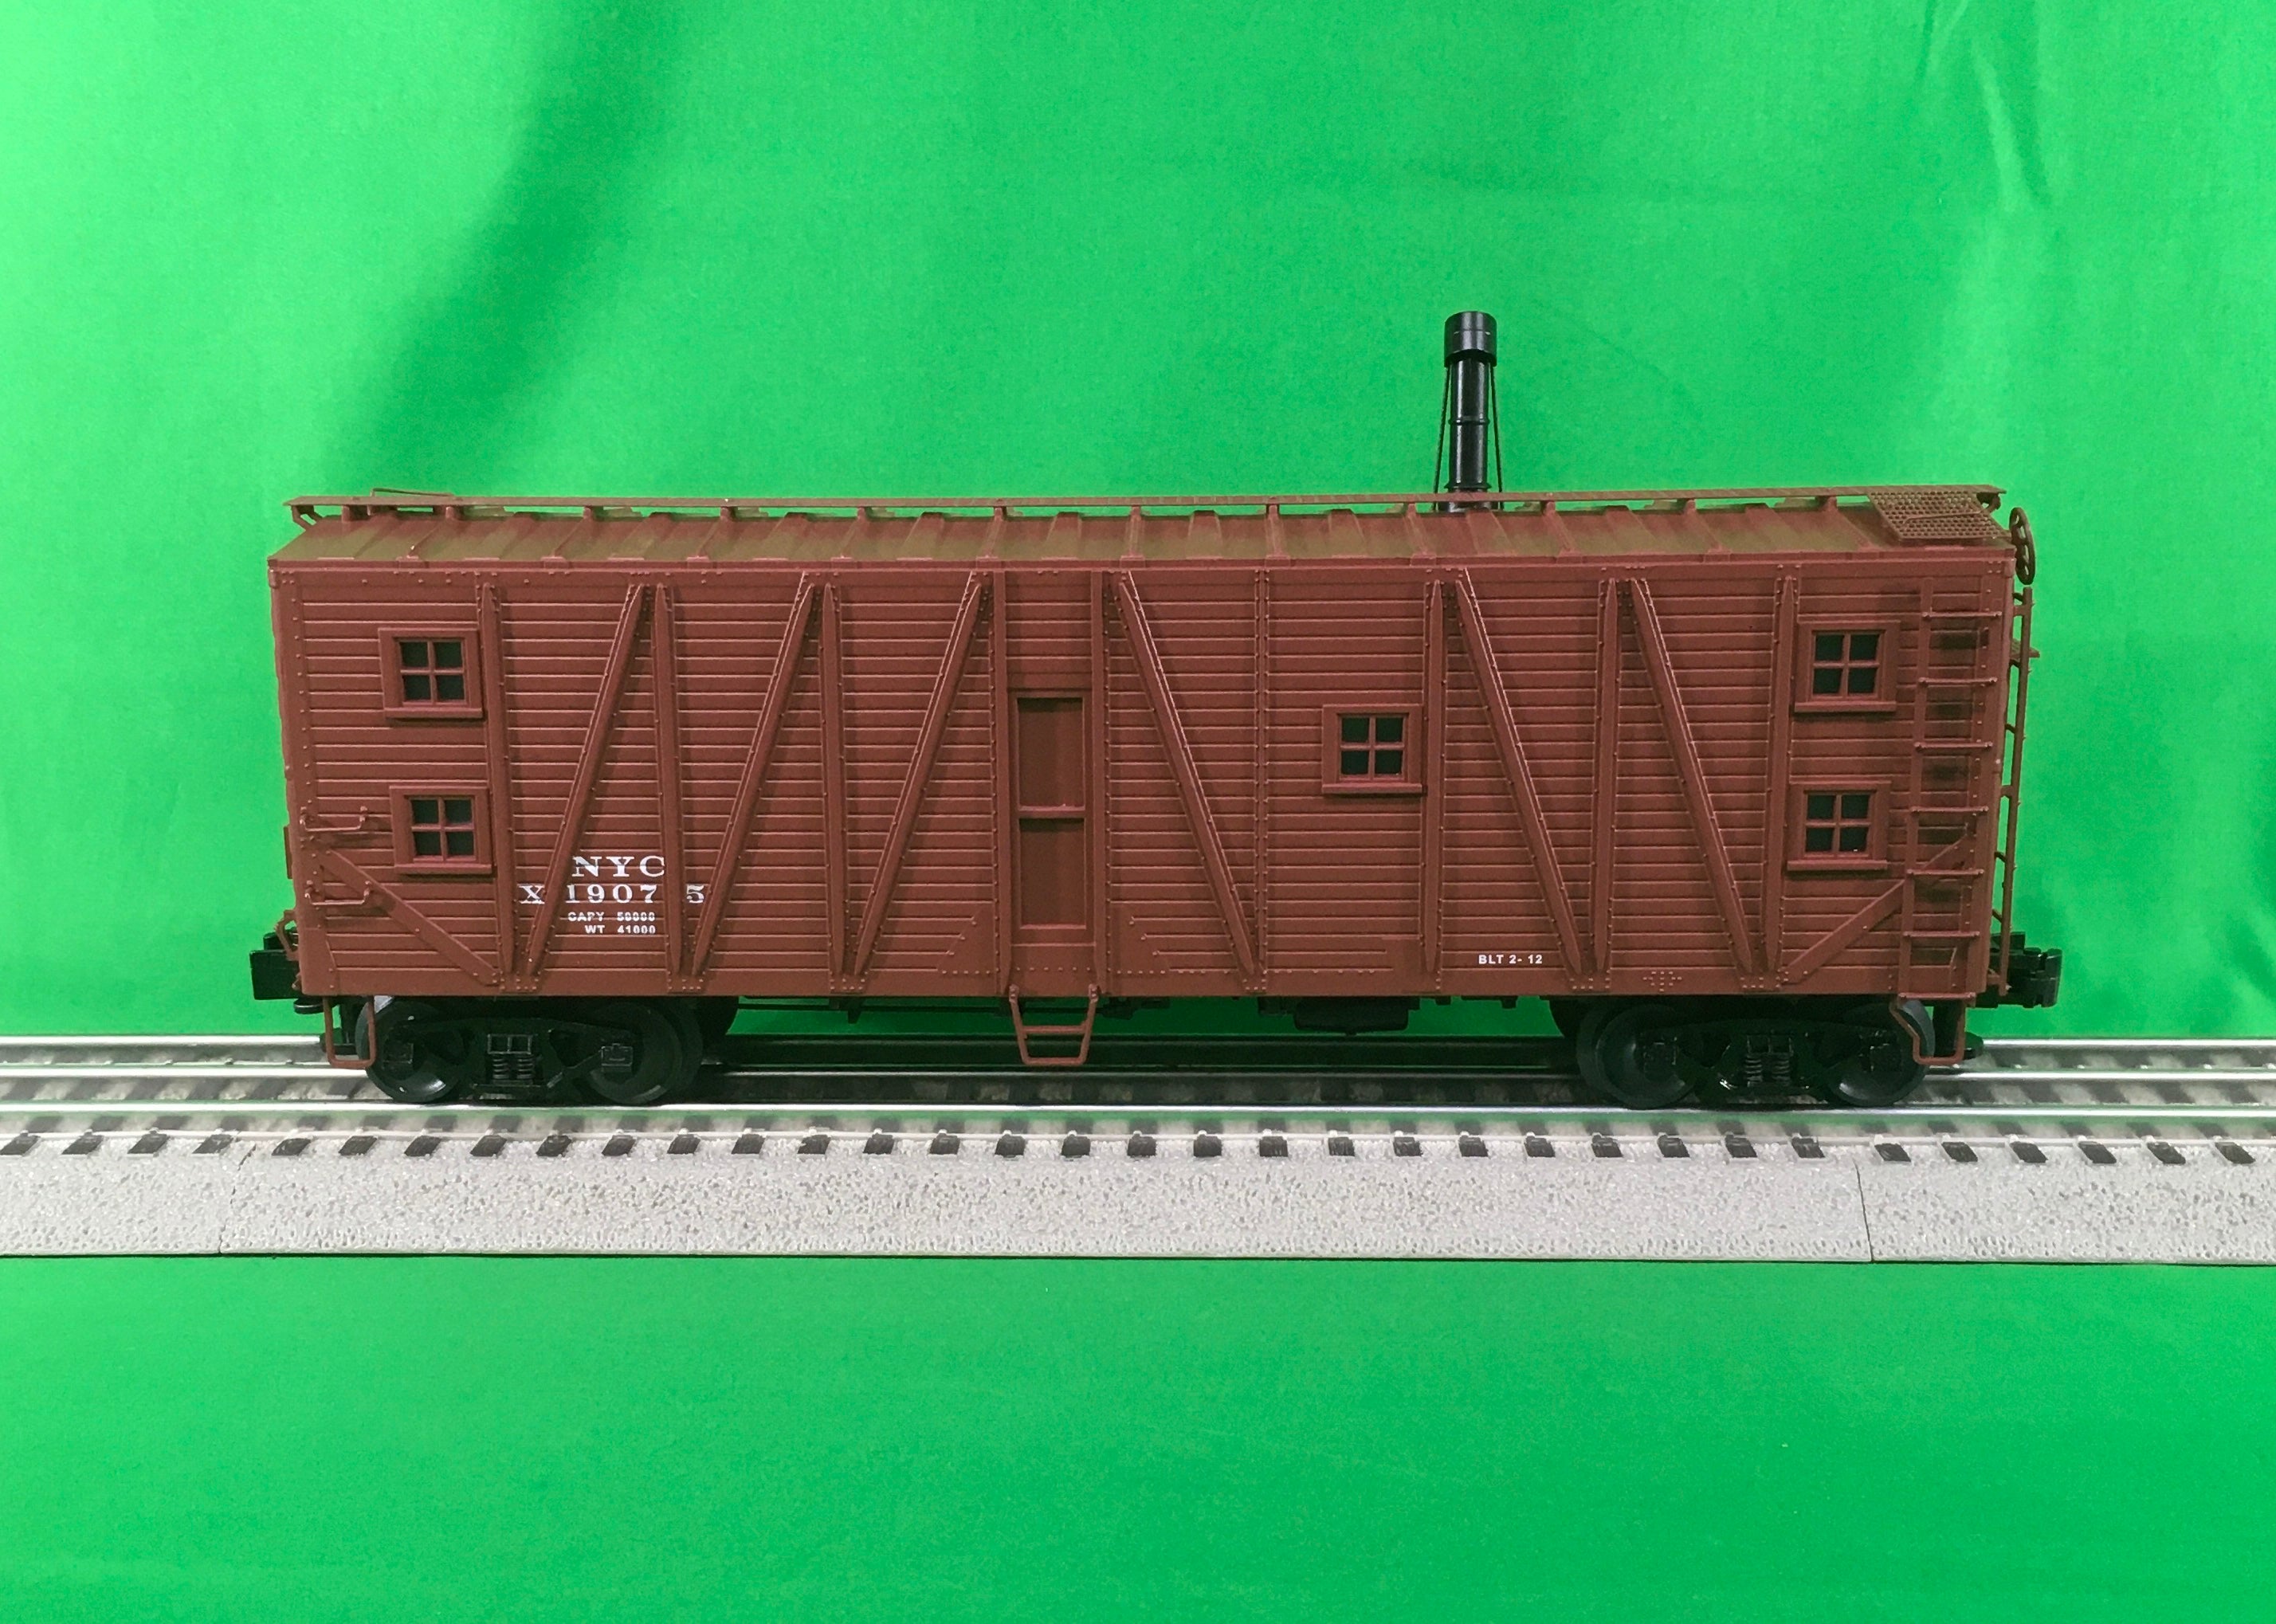 Lionel 1926151 - Bunk Car "New York Central" #x19075